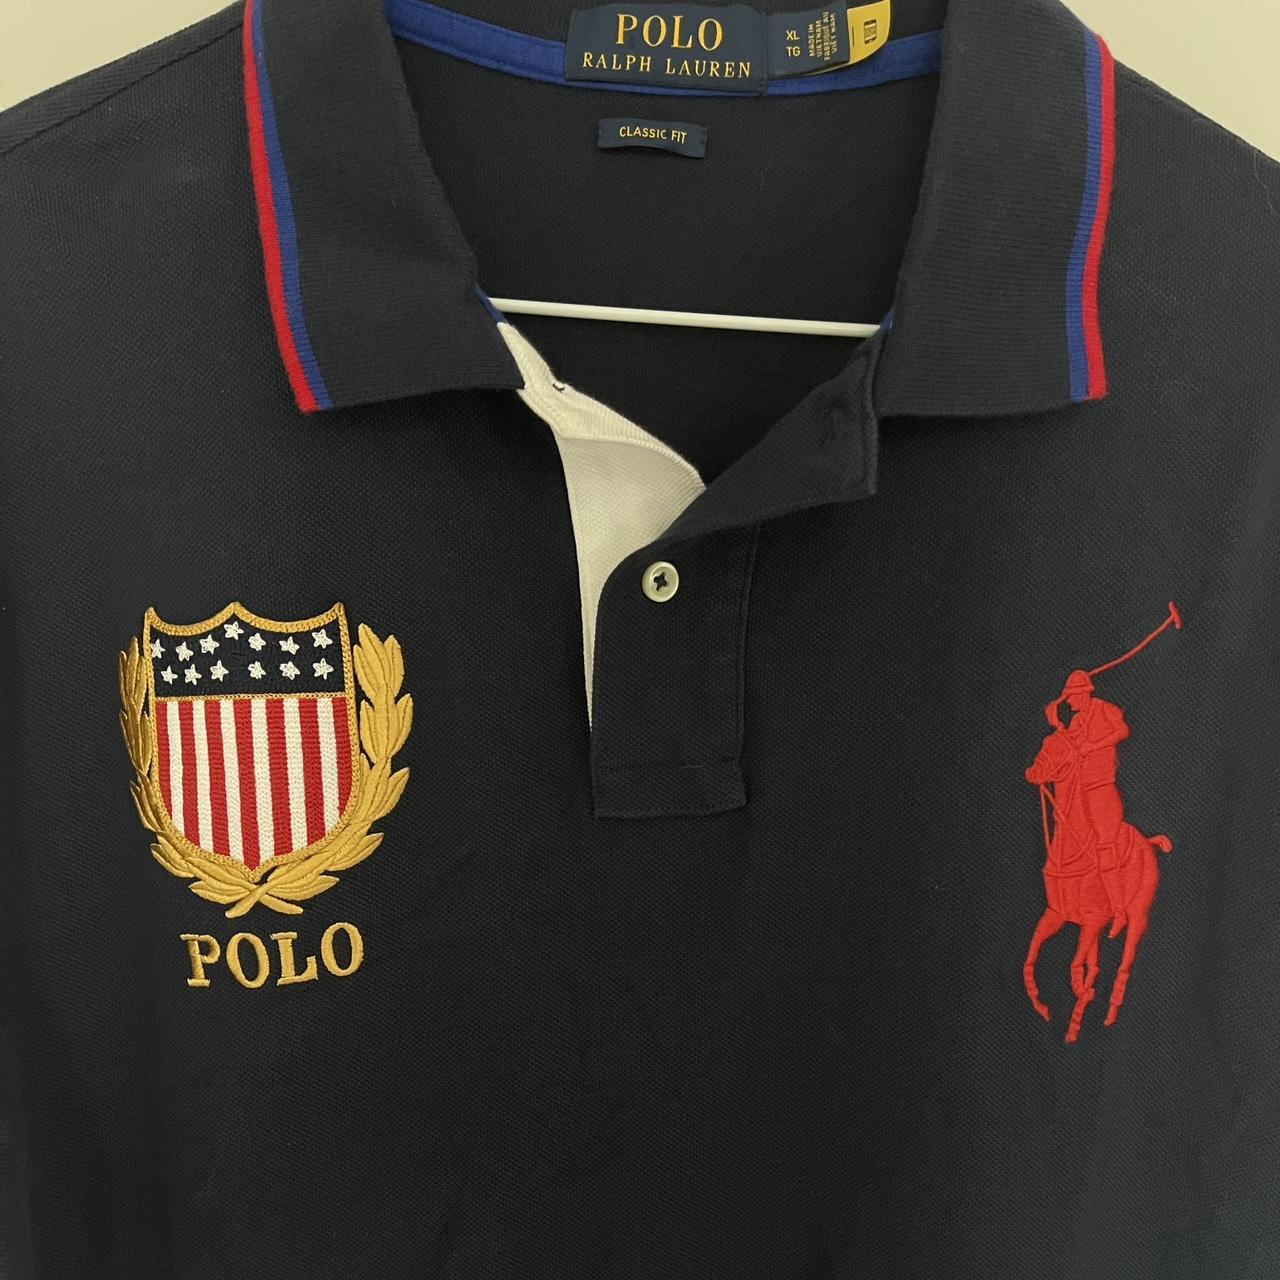 Polo Ralph Lauren, Preowned & Secondhand Fashion